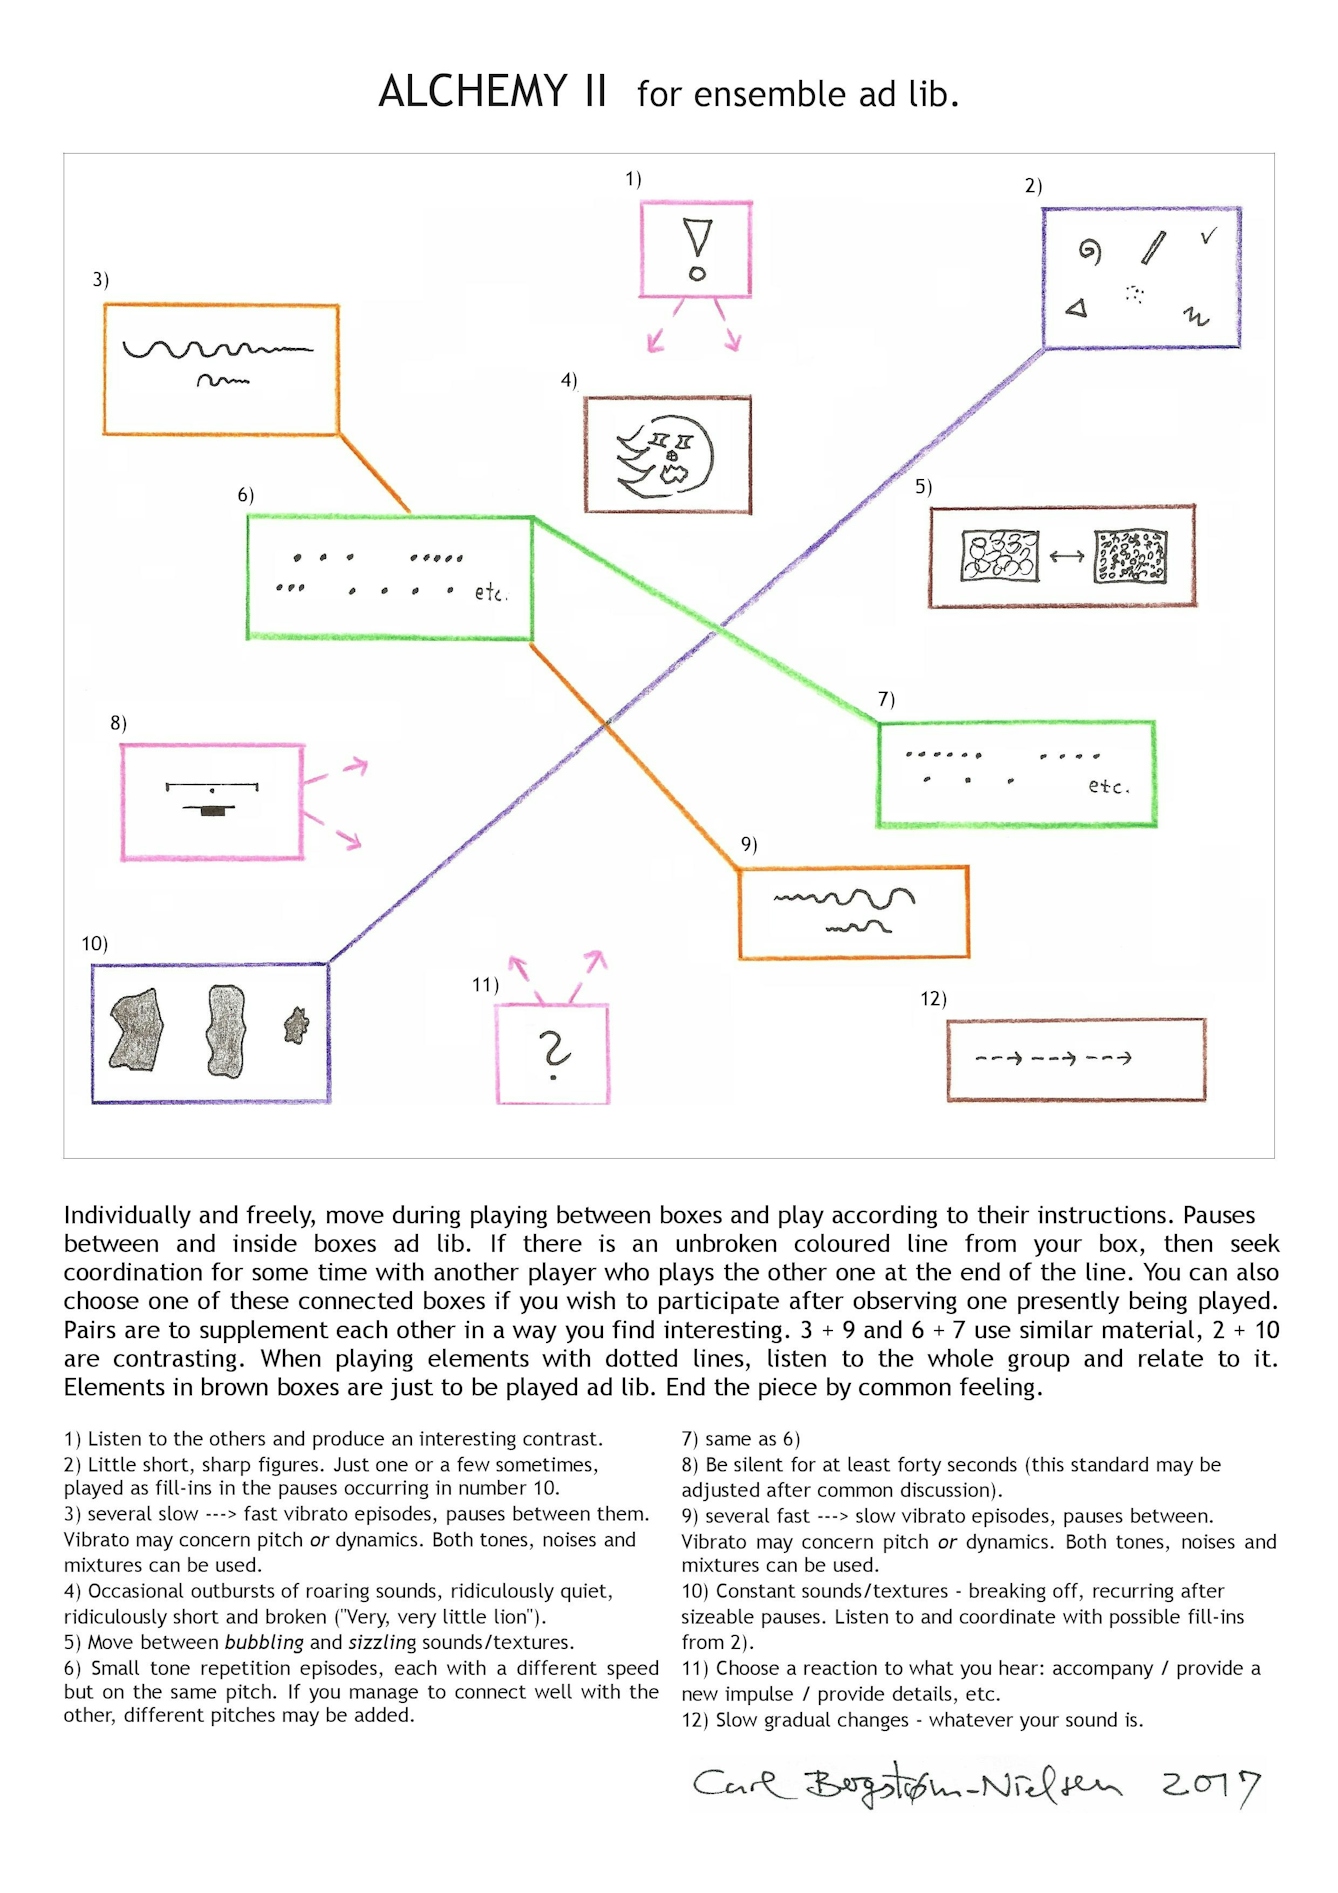 Image of a page from Alchemy II, which shows a graphic score with a diagram and accompanying text. 